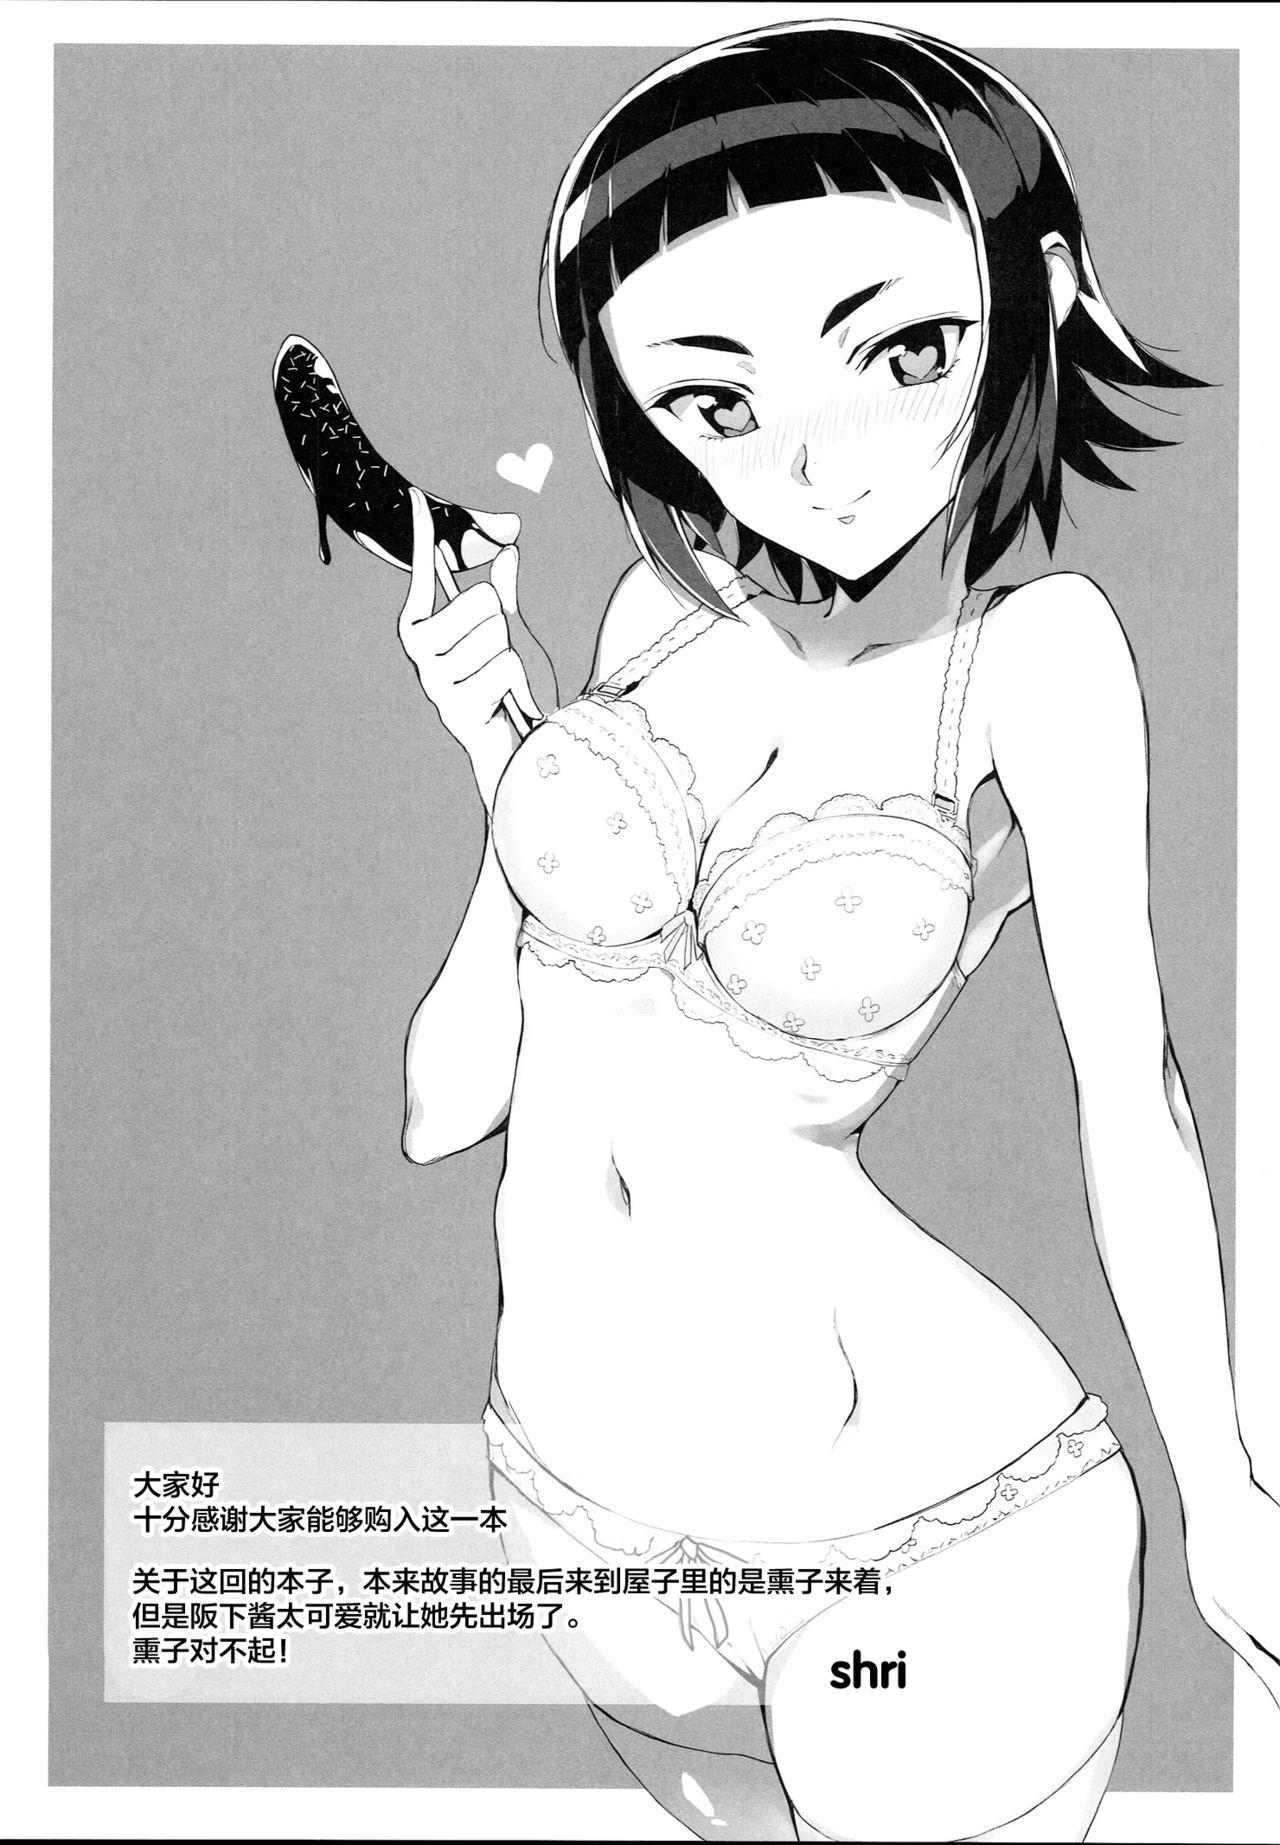 Close BIG APPLE - Gundam build fighters try Blowjob Contest - Page 26